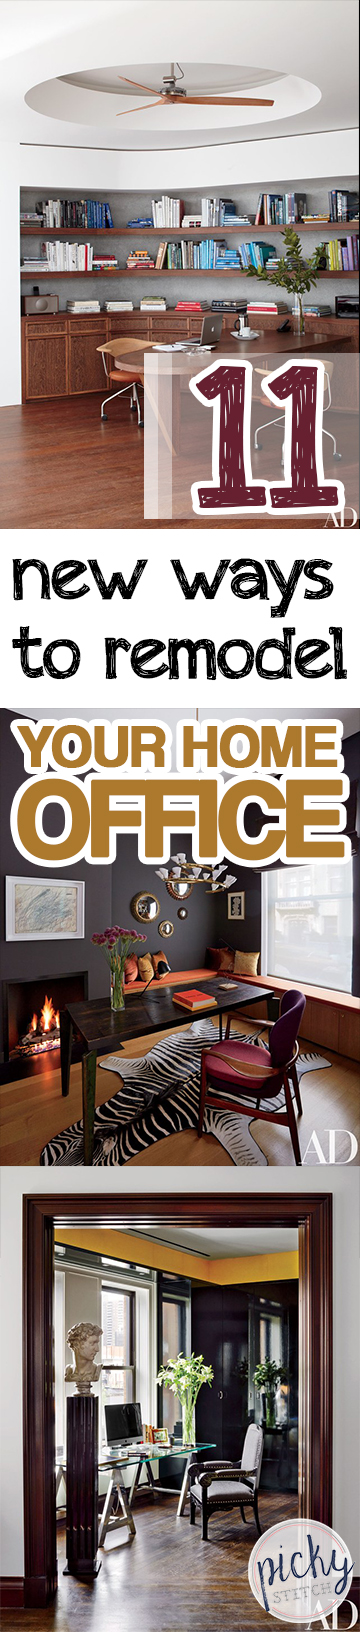 How to Remodel Your Office, Home Office Remodeling, Home Office Inspirations, Home Office Organization, Office Organization, Office Organization Hacks, Home Organization, Home Remodel, Easy Office Remodel, DIY Office Organization, DIY Office Remodel, Popular 